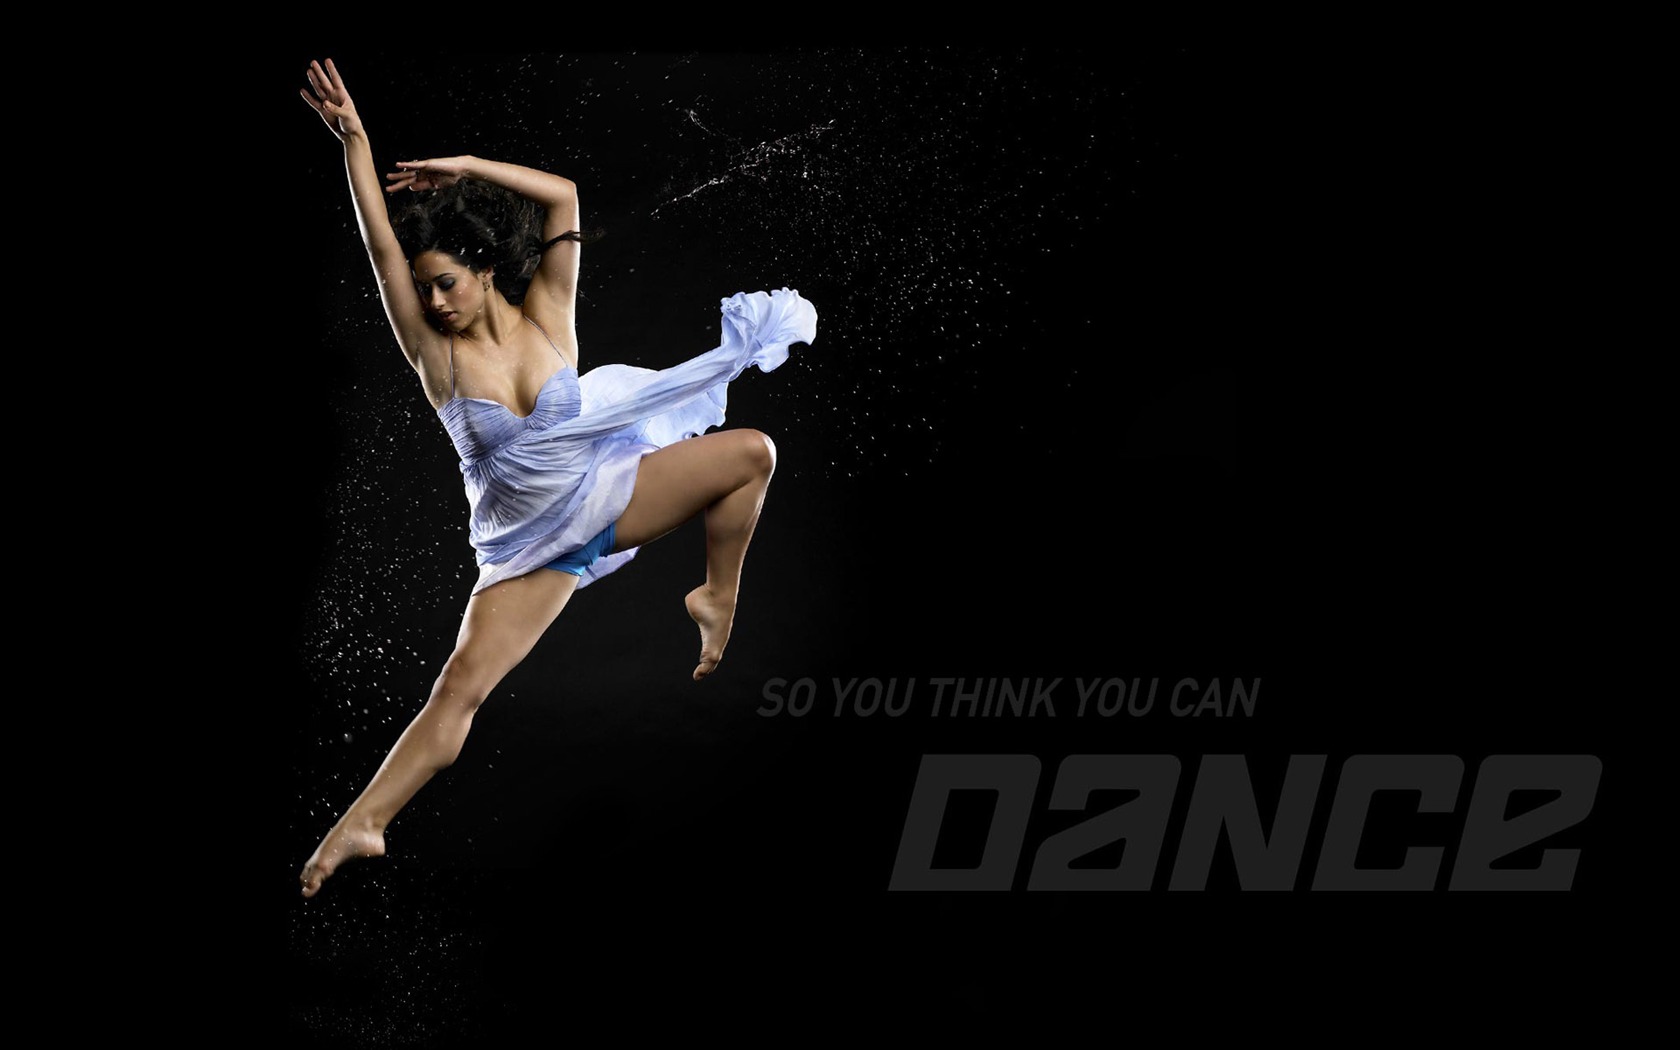 So You Think You Can Dance Wallpaper (1) #3 - 1680x1050